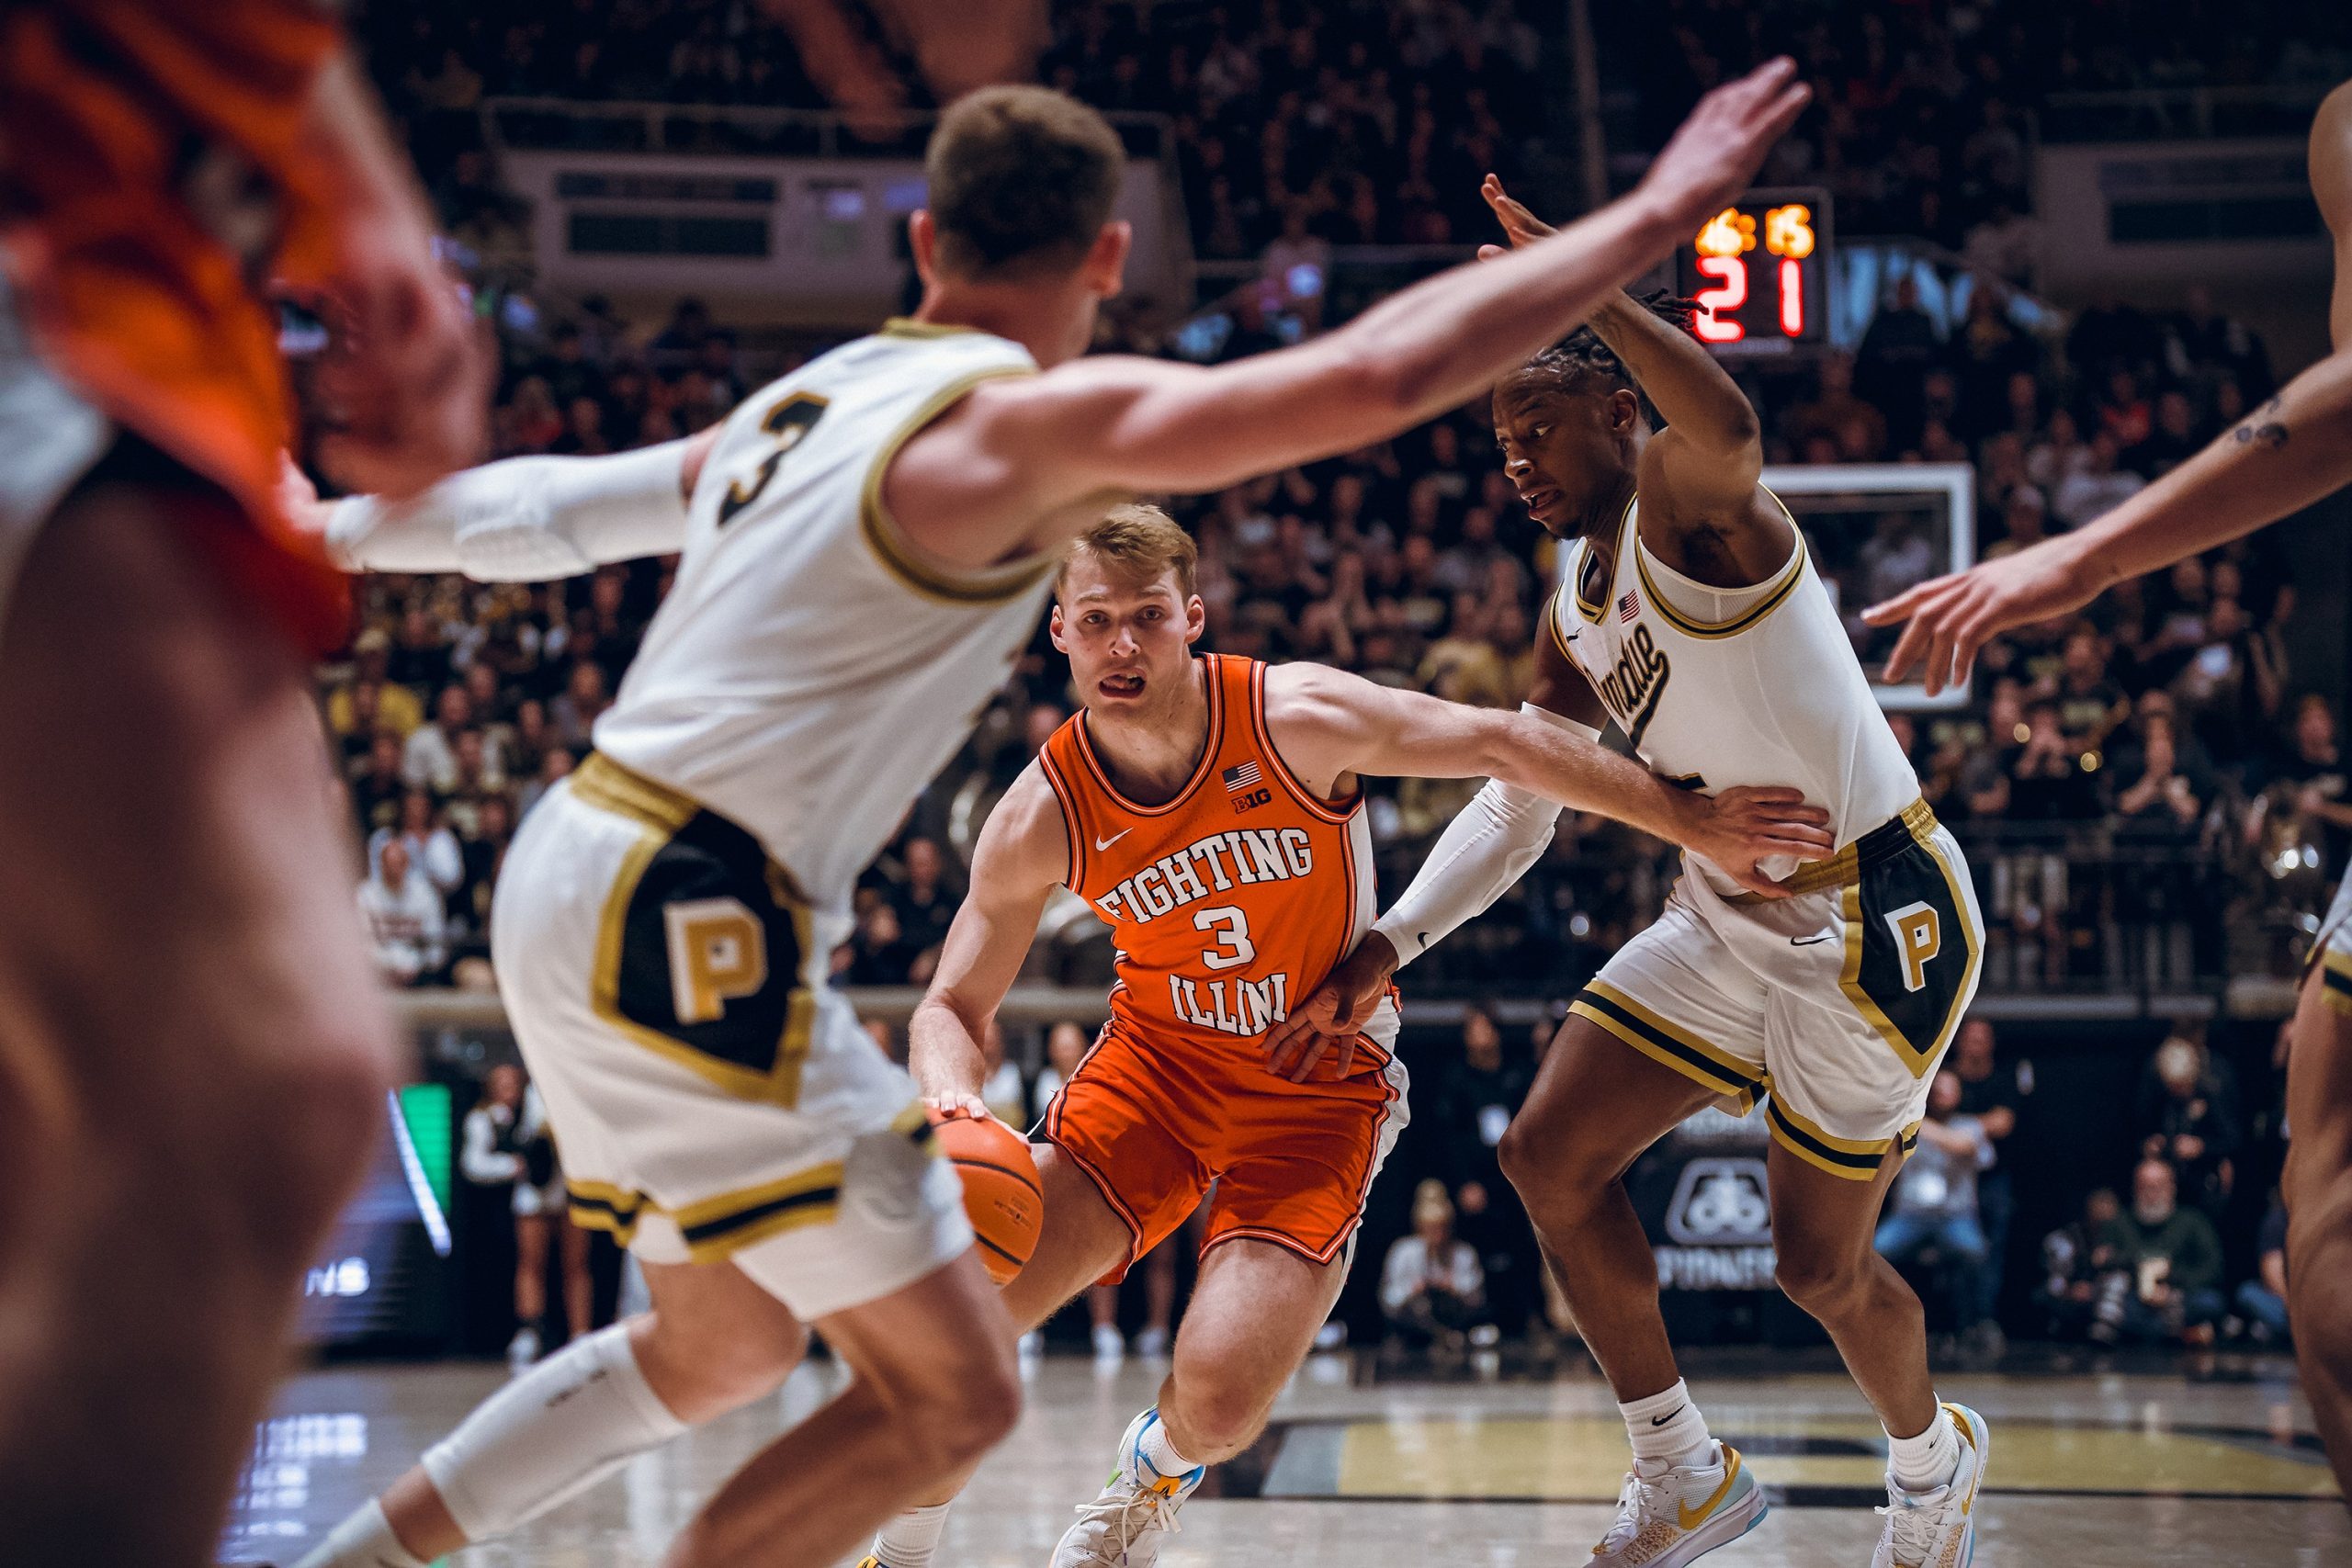 ‘They punked us’: Illinois Physically Dominated Early But Respond in Loss at No. 1 Purdue 